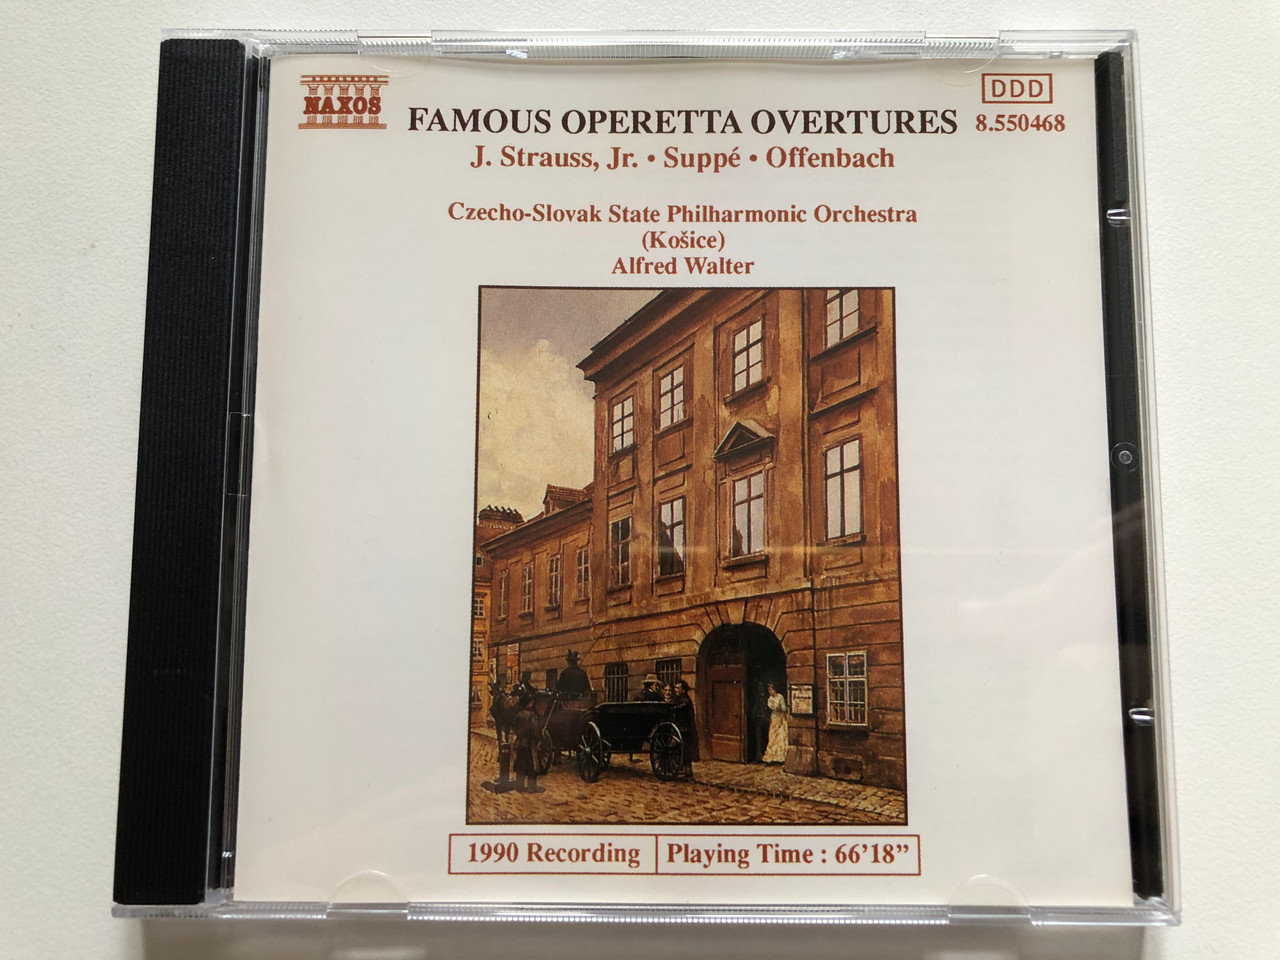 https://cdn10.bigcommerce.com/s-62bdpkt7pb/products/0/images/306650/Famous_Operetta_Overtures_-_J._Strauss_Jr._Supp_Offenbach_-_Czecho-Slovak_State_Philharmonic_Orchestra_Koice_Alfred_Walter_1990_Recording_Playing_Time_6618_Naxos_Audio_CD_1991_St_1__74220.1698329927.1280.1280.JPG?c=2